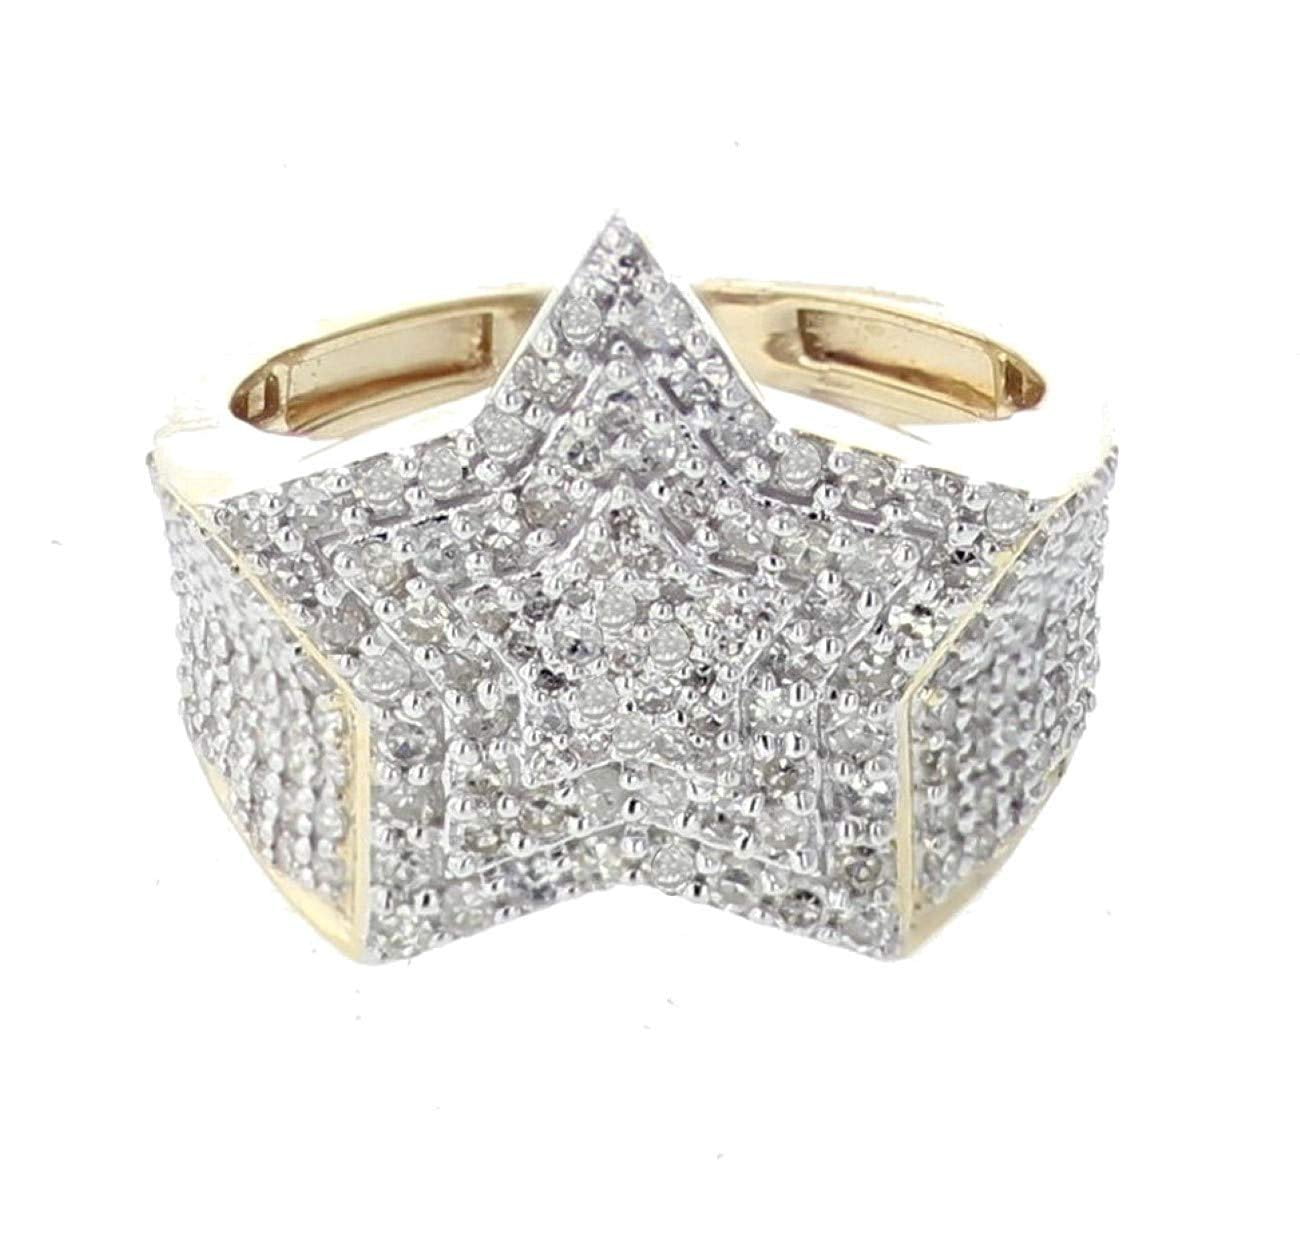 Details about   Men's Elegant Star Five Point Sim Diamond Ring in 1.85 ct 14k Yellow Gold Plated 